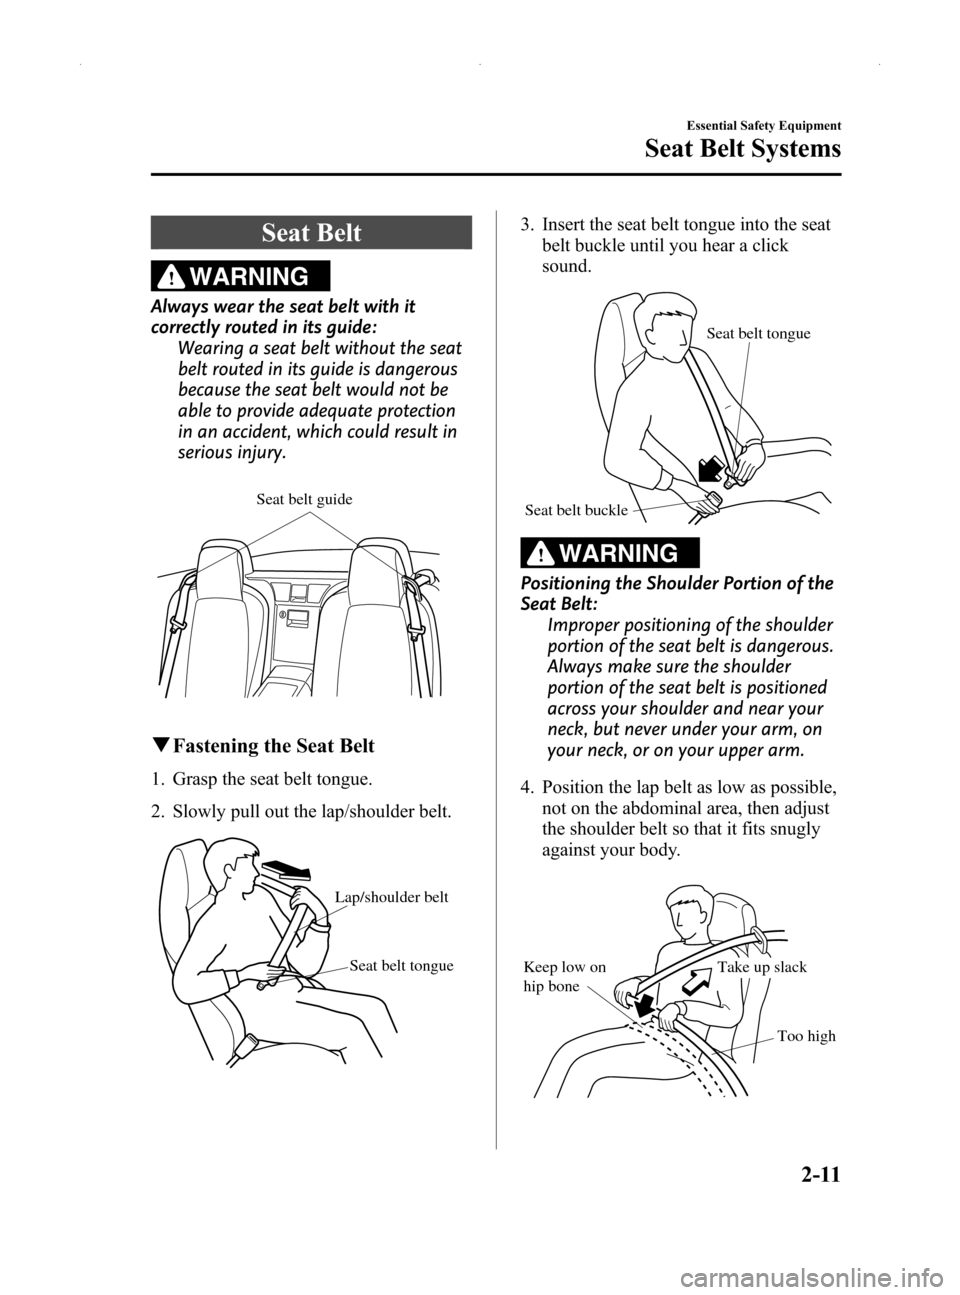 MAZDA MODEL MX-5 2014   (in English) Owners Manual Black plate (23,1)
Seat Belt
WARNING
Always wear the seat belt with it
correctly routed in its guide:Wearing a seat belt without the seat
belt routed in its guide is dangerous
because the seat belt wo